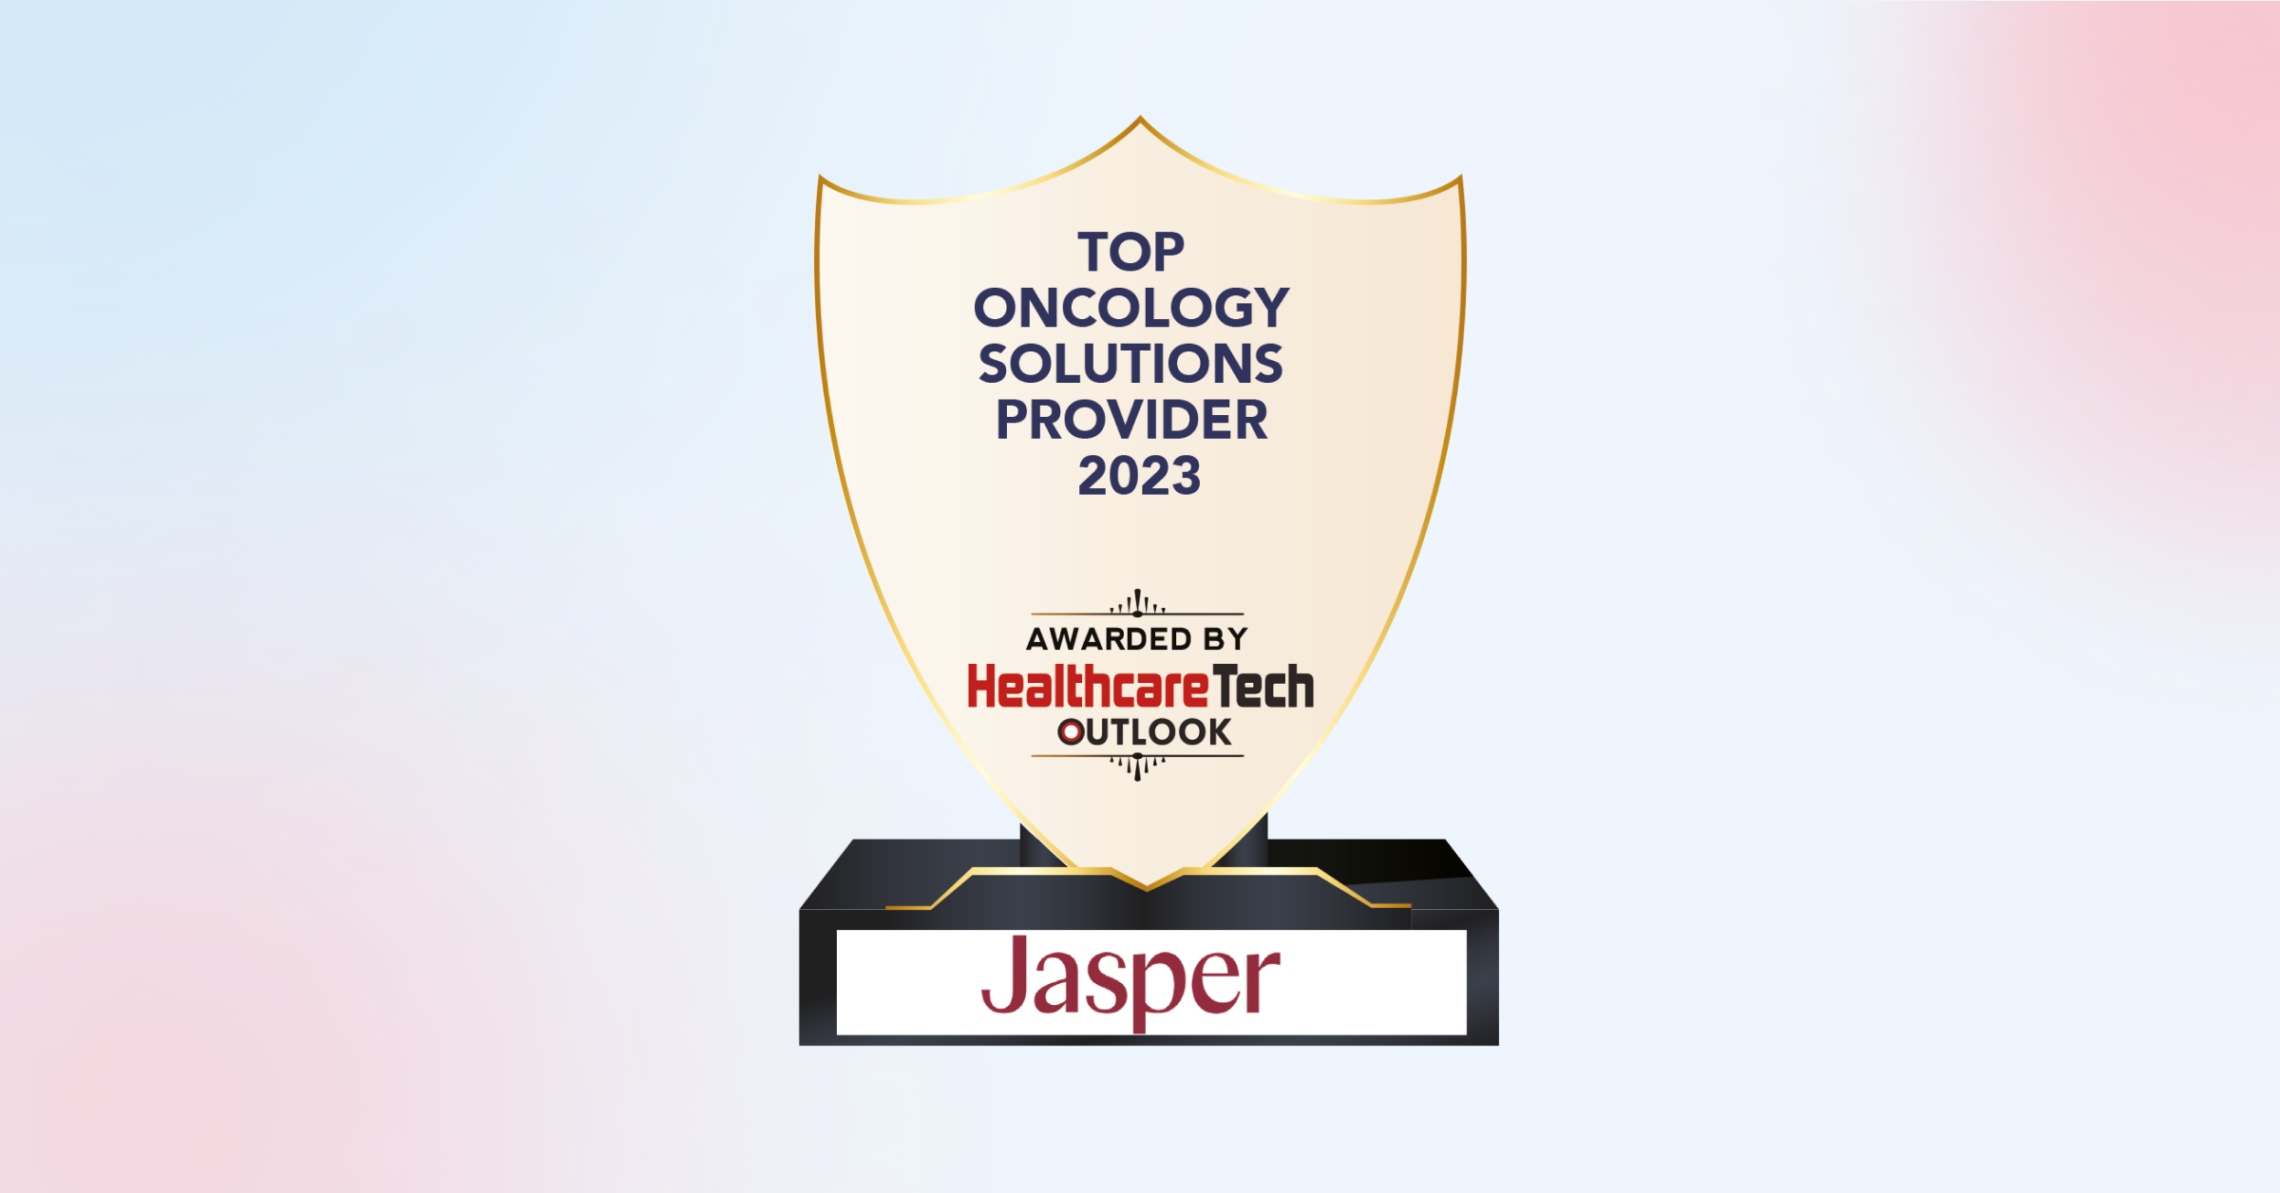 Top Oncology Solutions Provider 2023 award with Award by Healthcare Tech Outlook subtext; Jasper logo